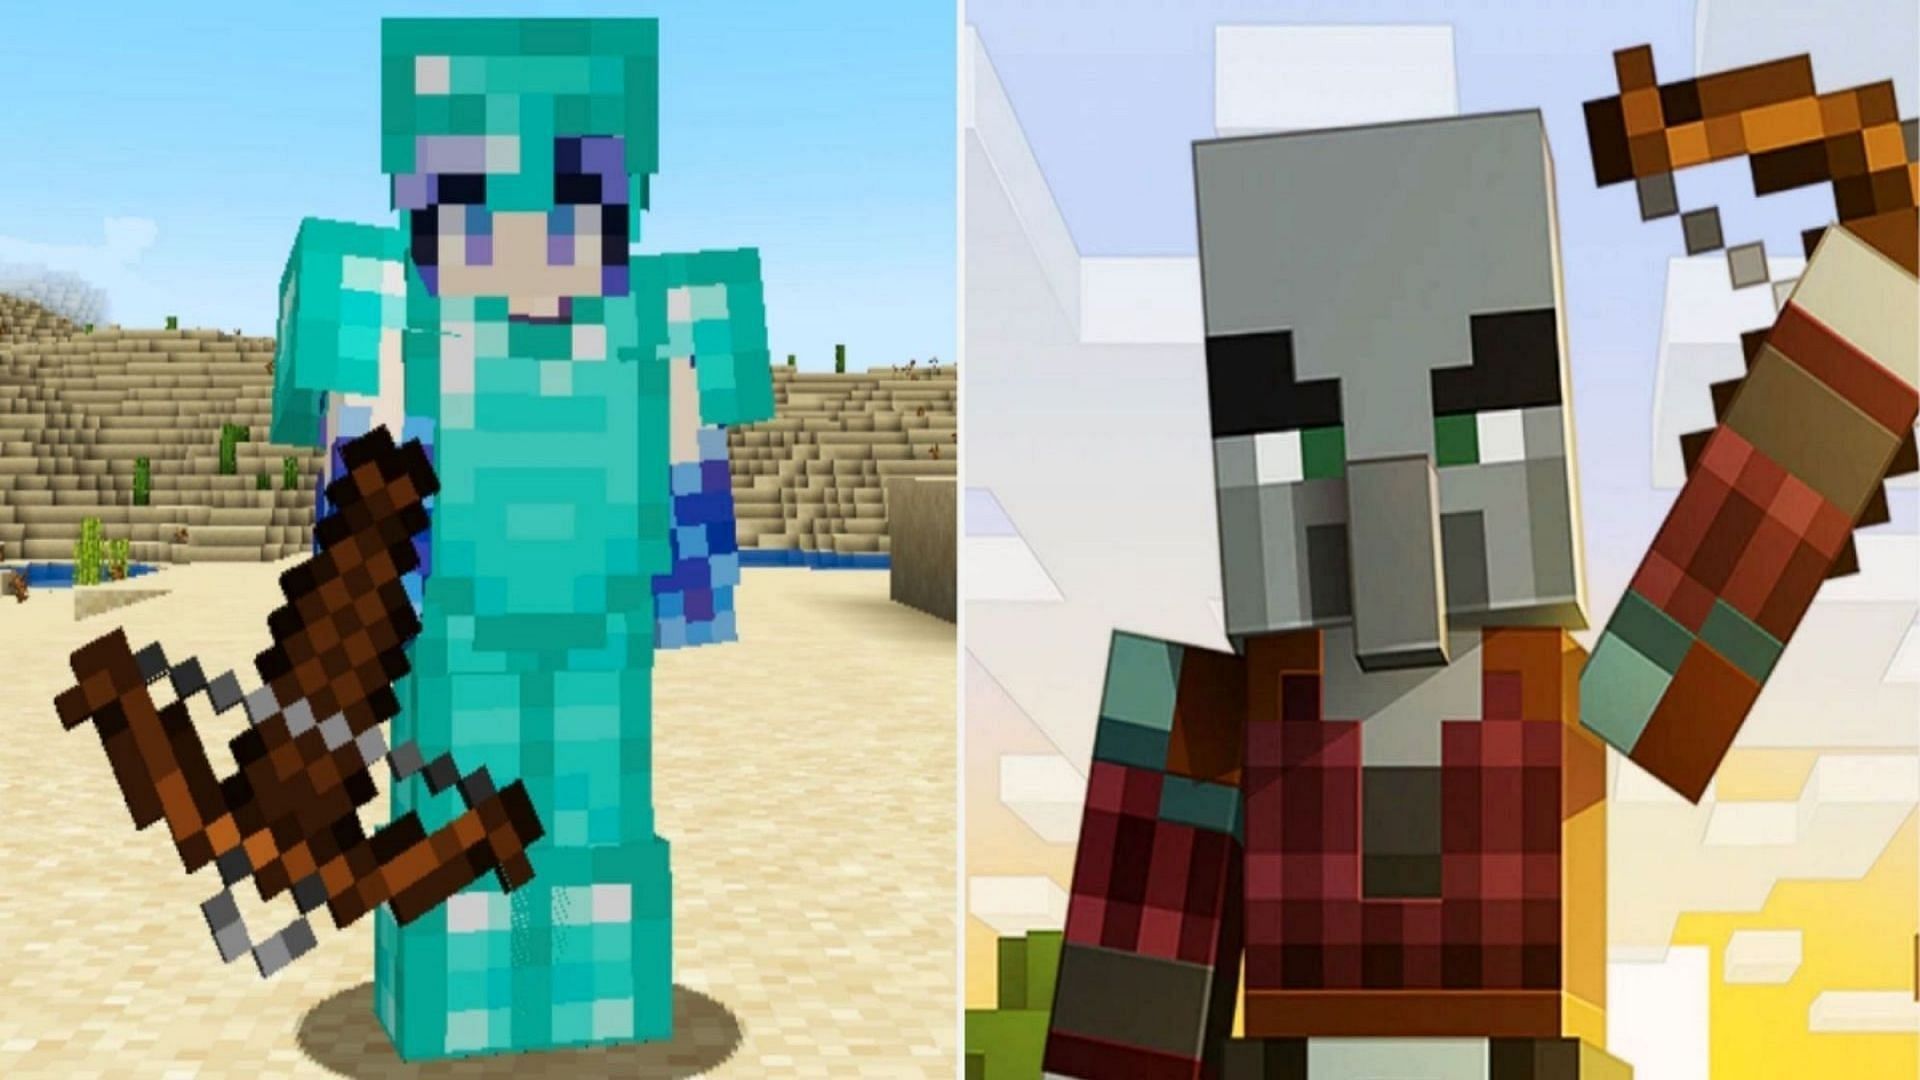 Piercing can be applied to crossbows in Minecraft (Image via Mojang)